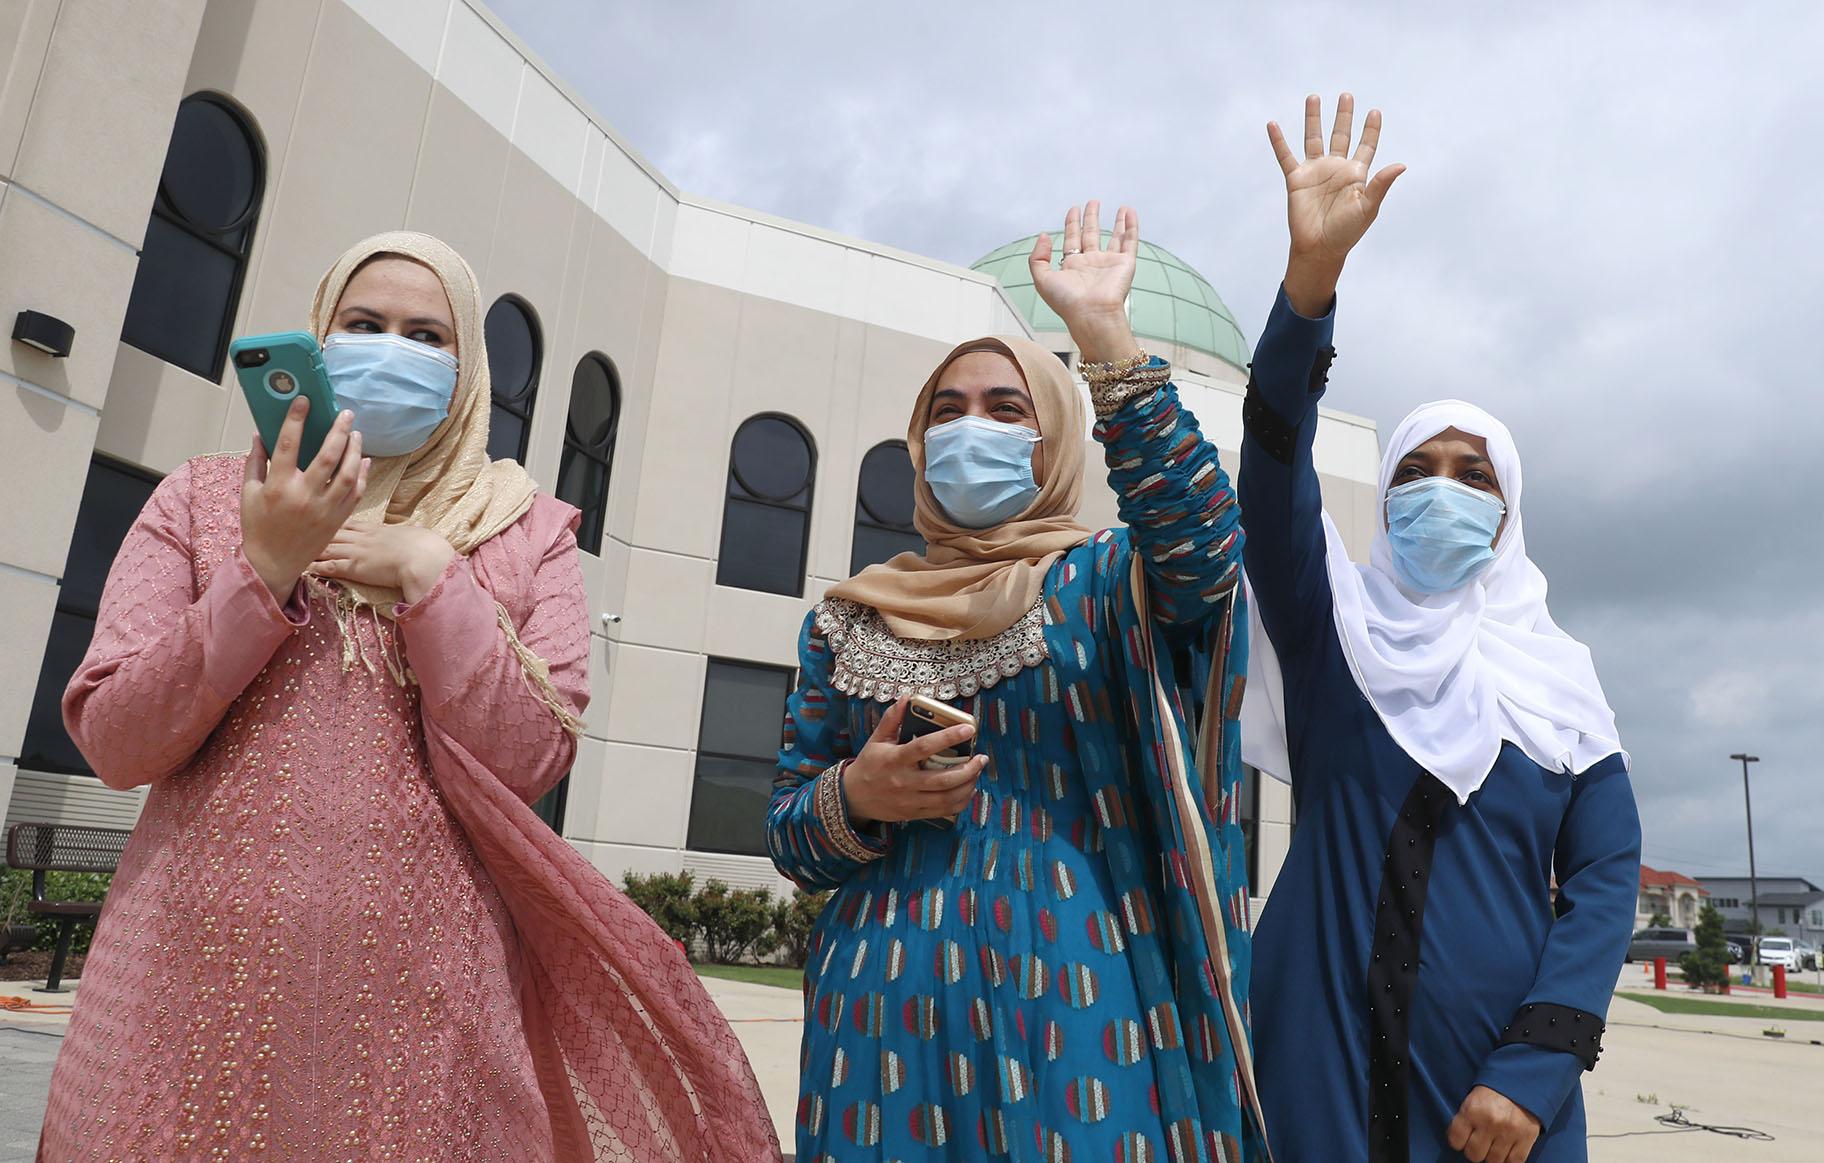 Saba Mahjabeen, right, and Gizman Mawi, center, waive as Sophia Baig looks on during a drive through Eid al-Fitr celebration outside a closed mosque in Plano, Texas, Sunday, May 24, 2020. (AP Photo / LM Otero)